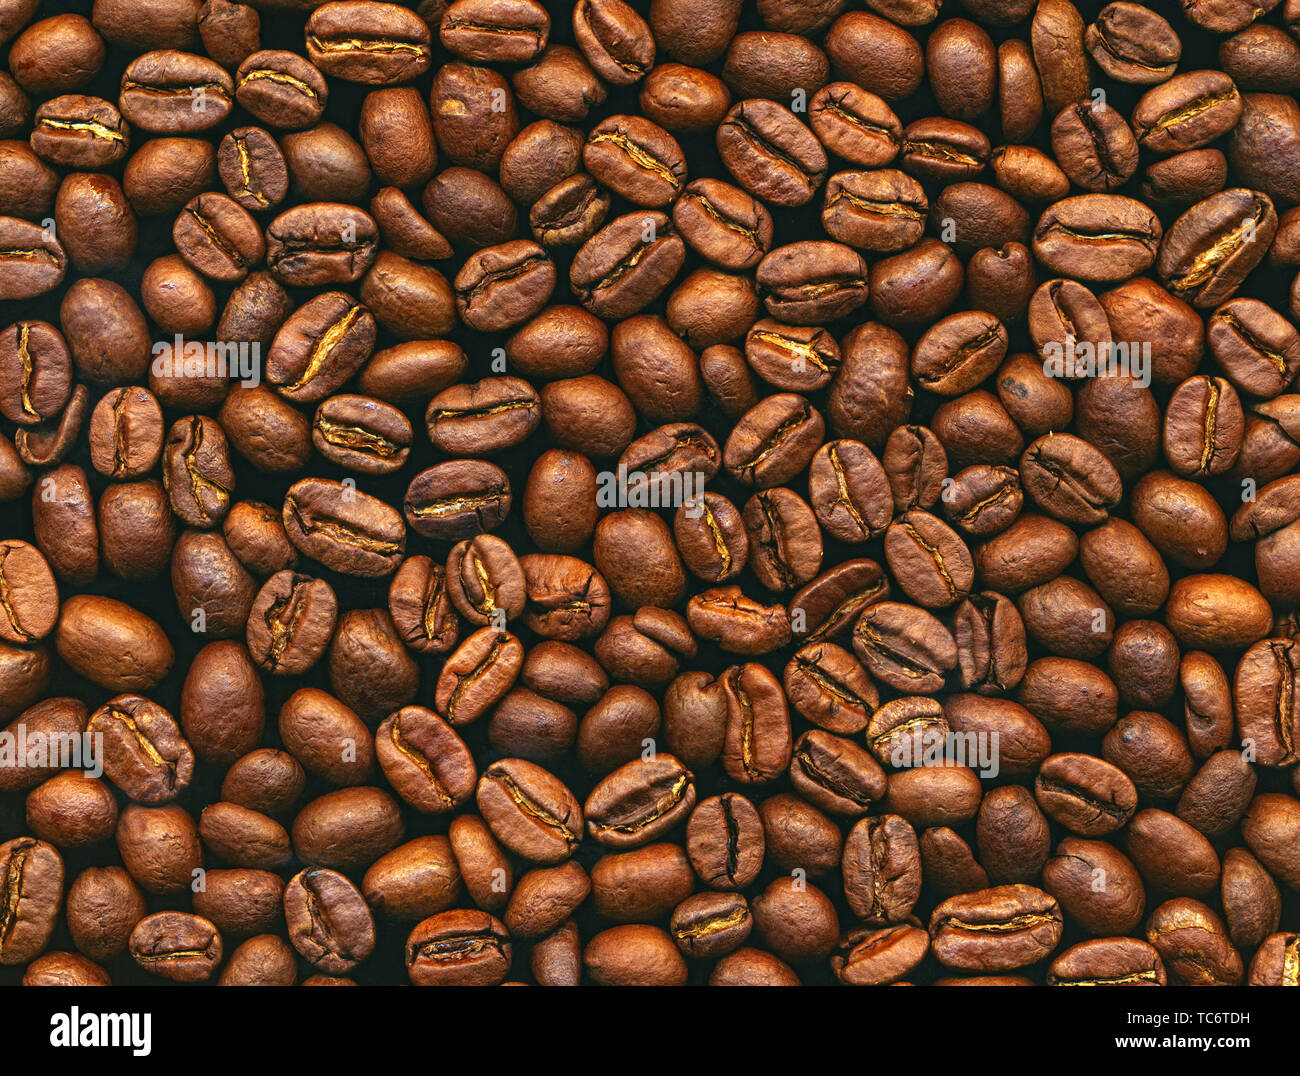 beans, brown, coffee, Stock Photo